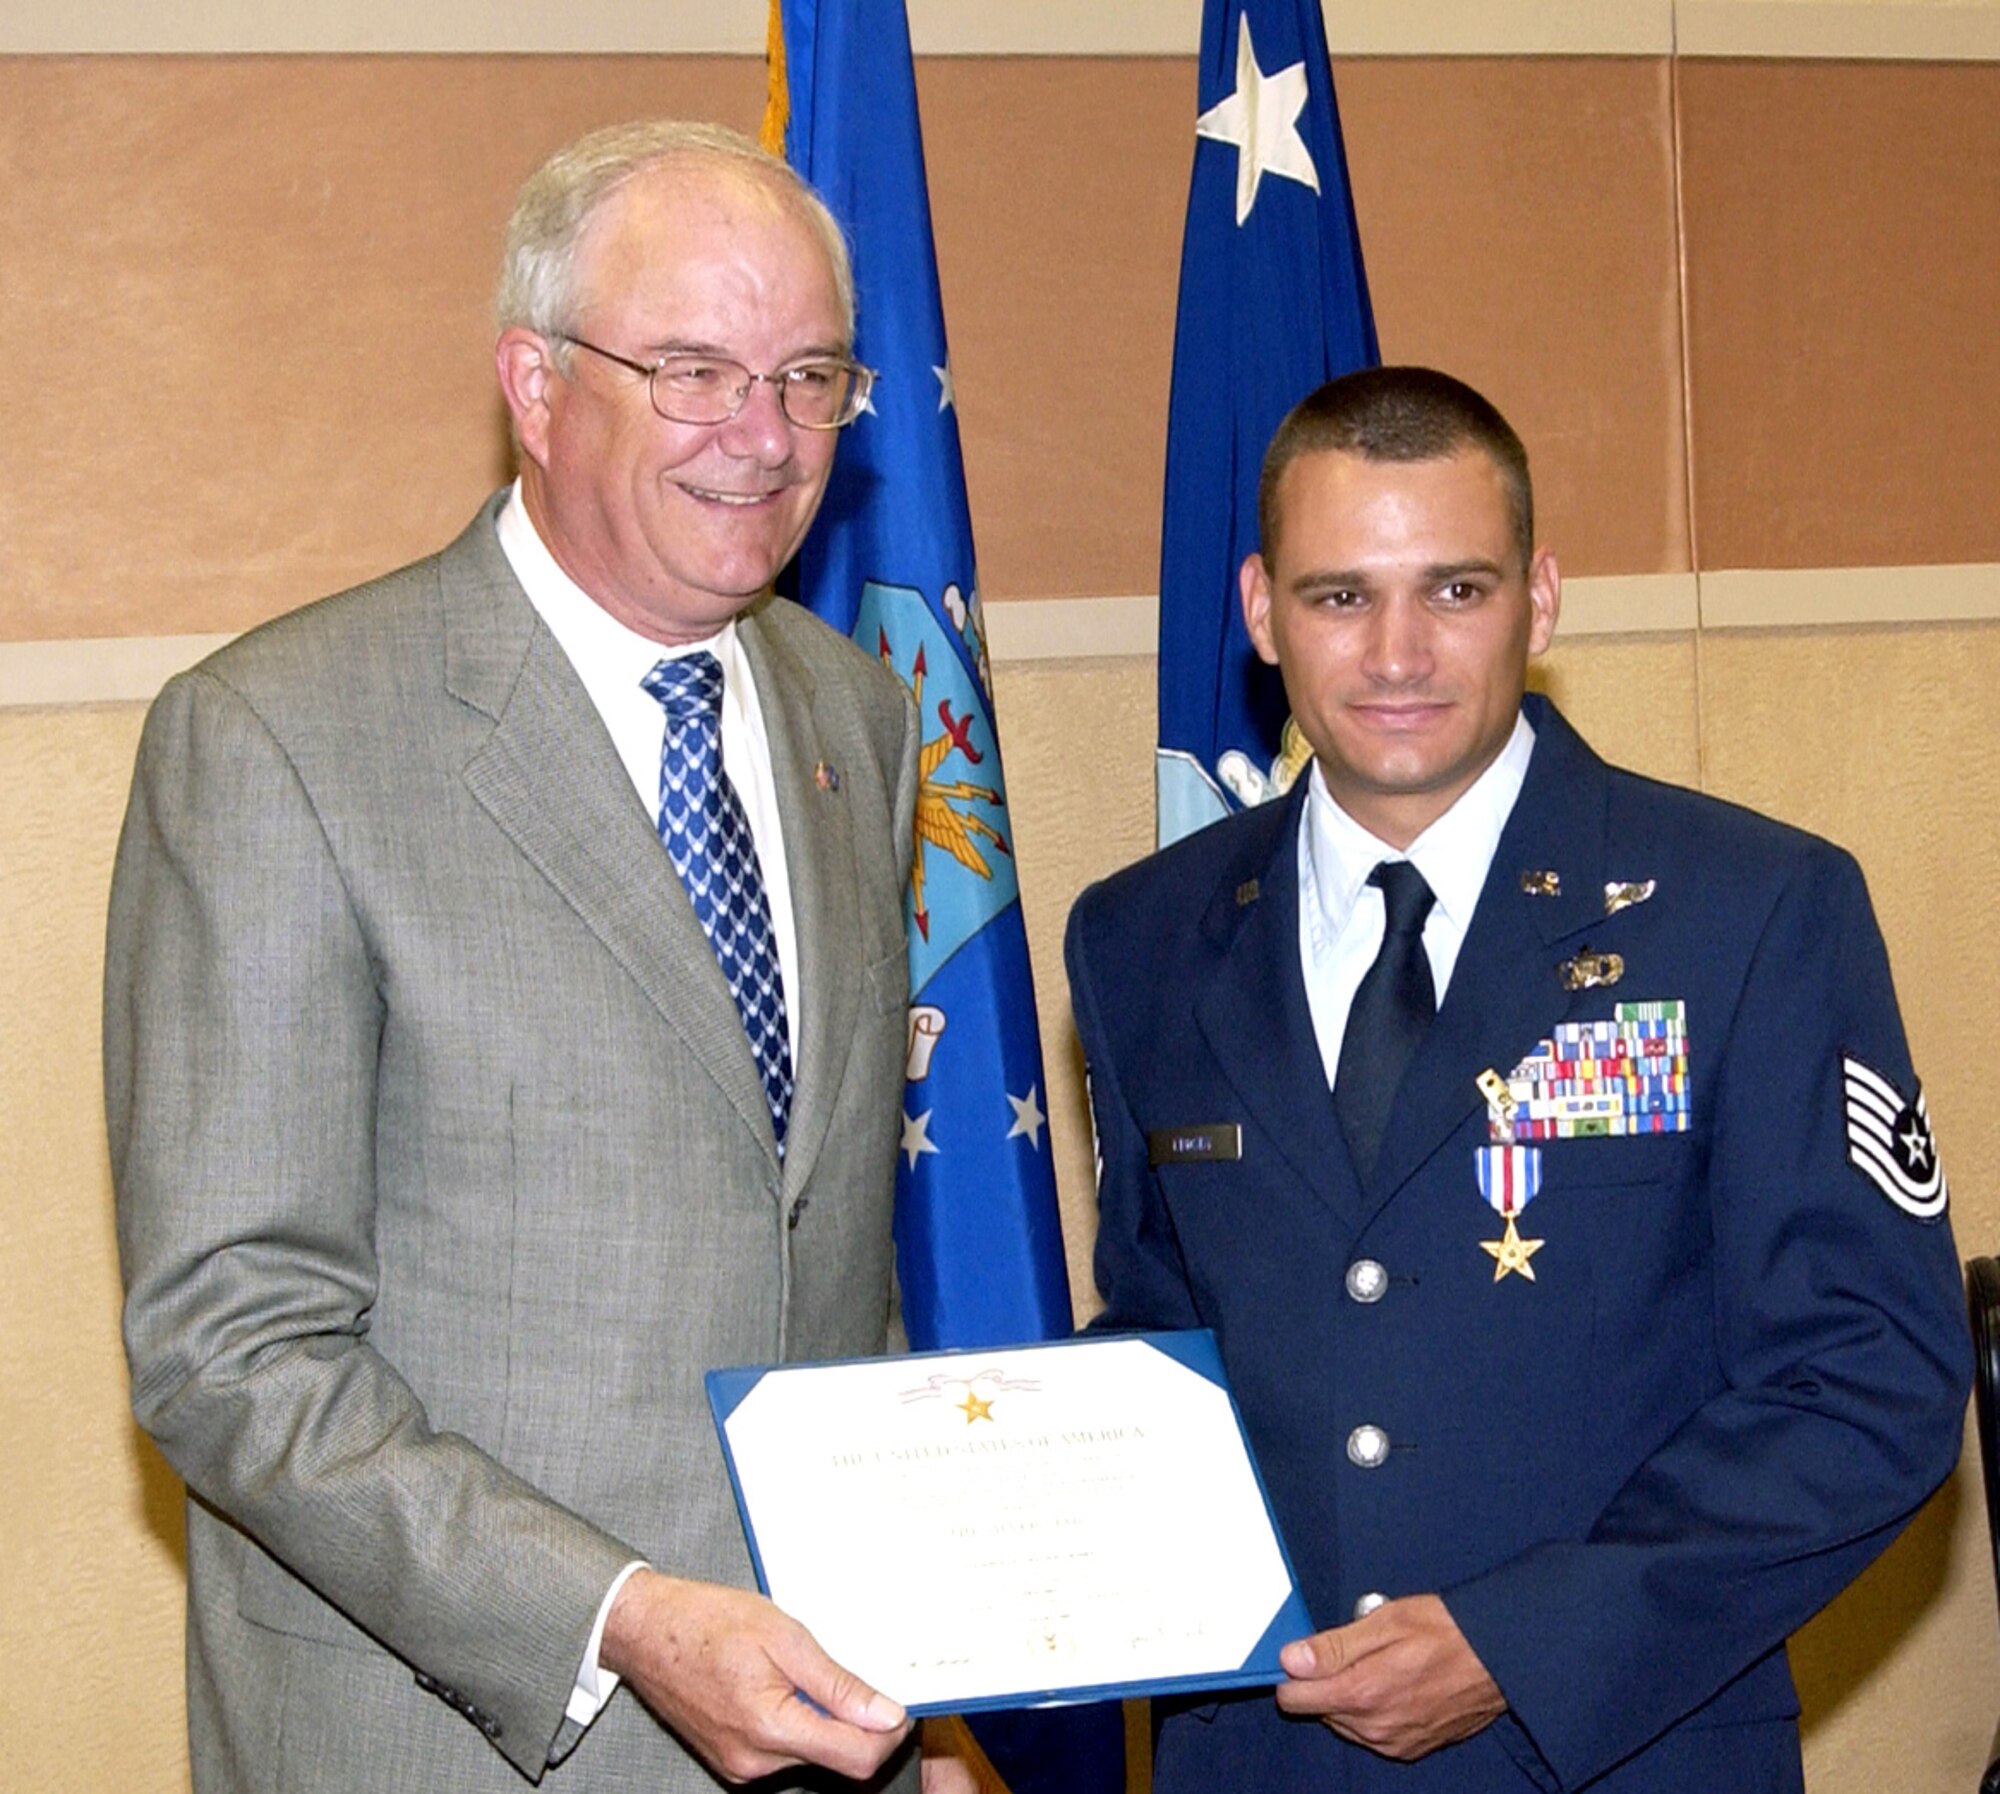 Secretary of the Air Force Michael Wynne presents Tech. Sgt. Travis Crosby with the Silver Star during a ceremony on Monday, June 26, at Pope Air Force Base, N.C., for heroic actions while deployed in support of Operation Iraqi Freedom in 2003. Sergeant Crosby is a member of a tactical air control party with the 15th Air Support Operations Squadron. (U.S. Air Force photo/Dave Davenport)